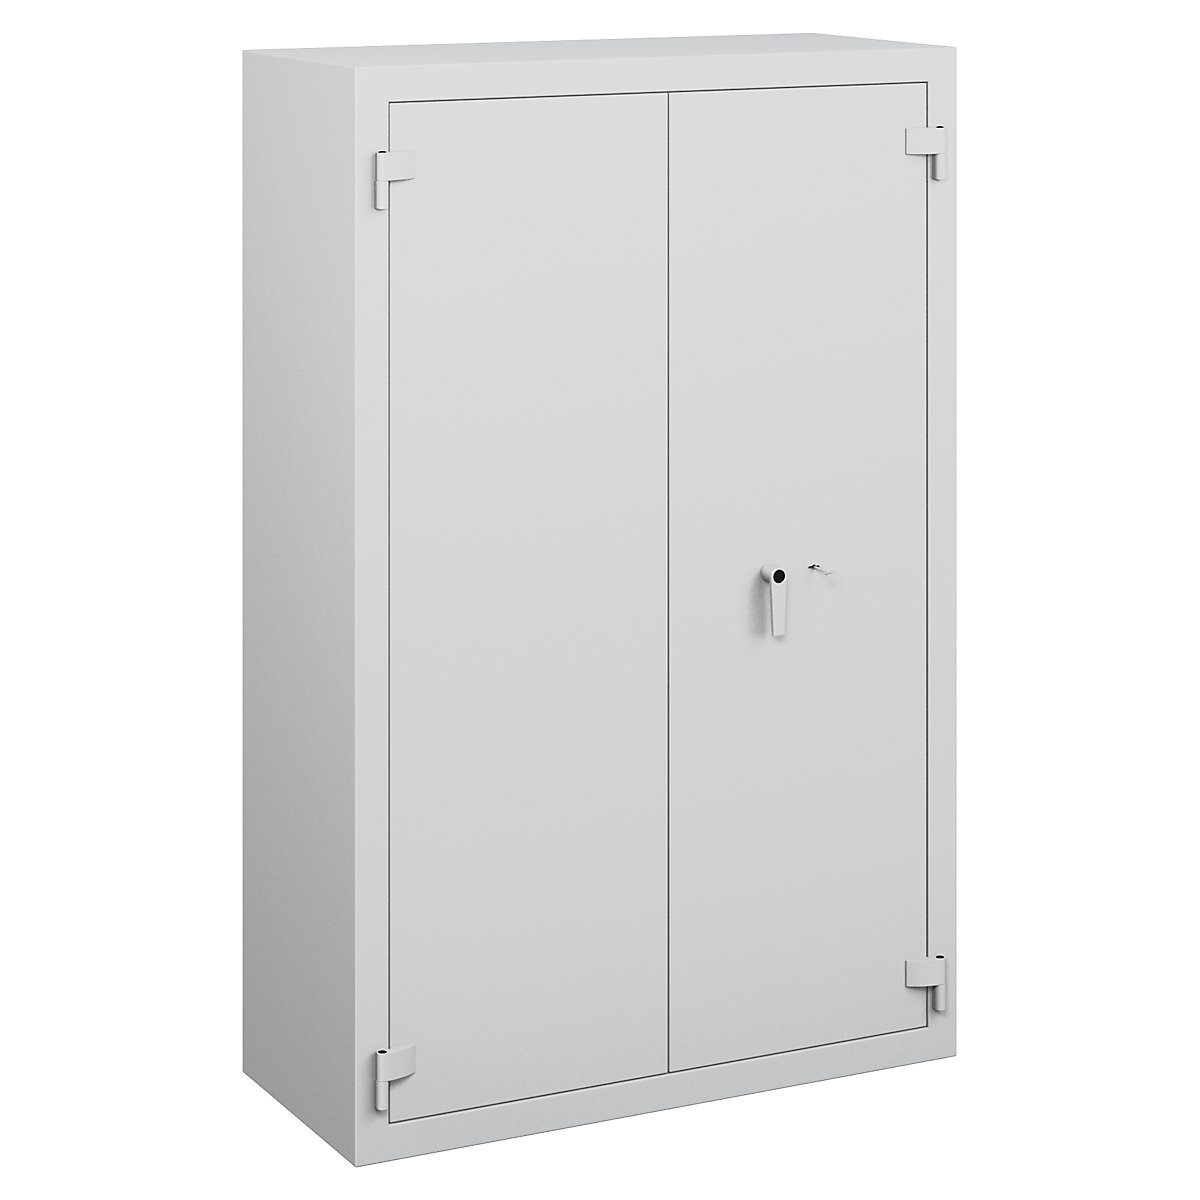 Standard safety cabinet, VDMA B, S2, HxWxD 1950 x 1260 x 500 mm, with double door-9